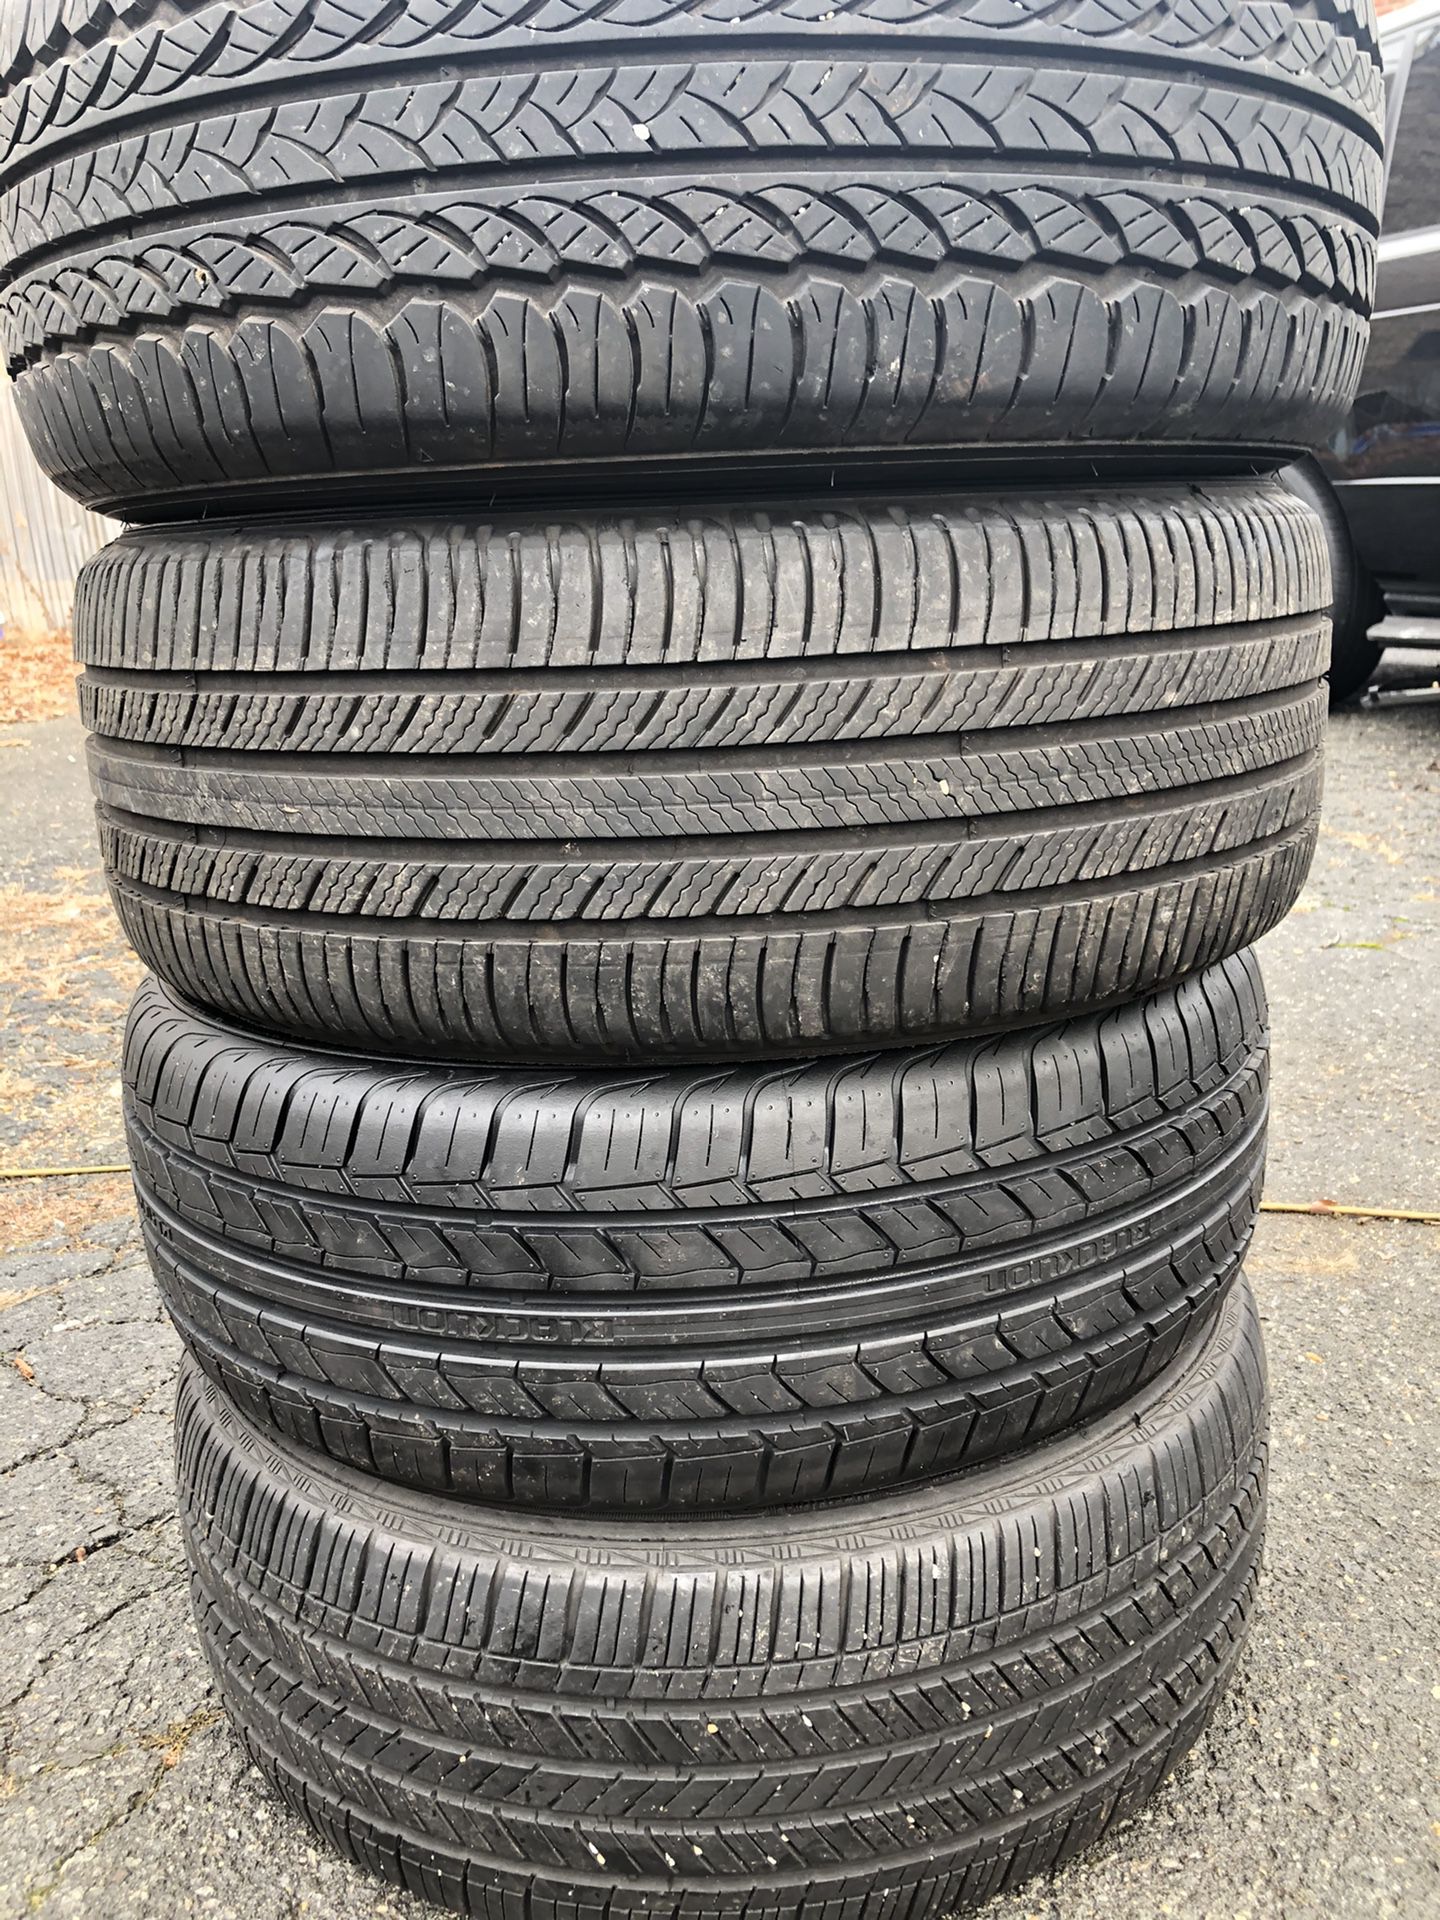 Set 4 usted tire 215/55R17 Goodyear MICHELIN KUMHO BLACKLION set 4 usted tire $130